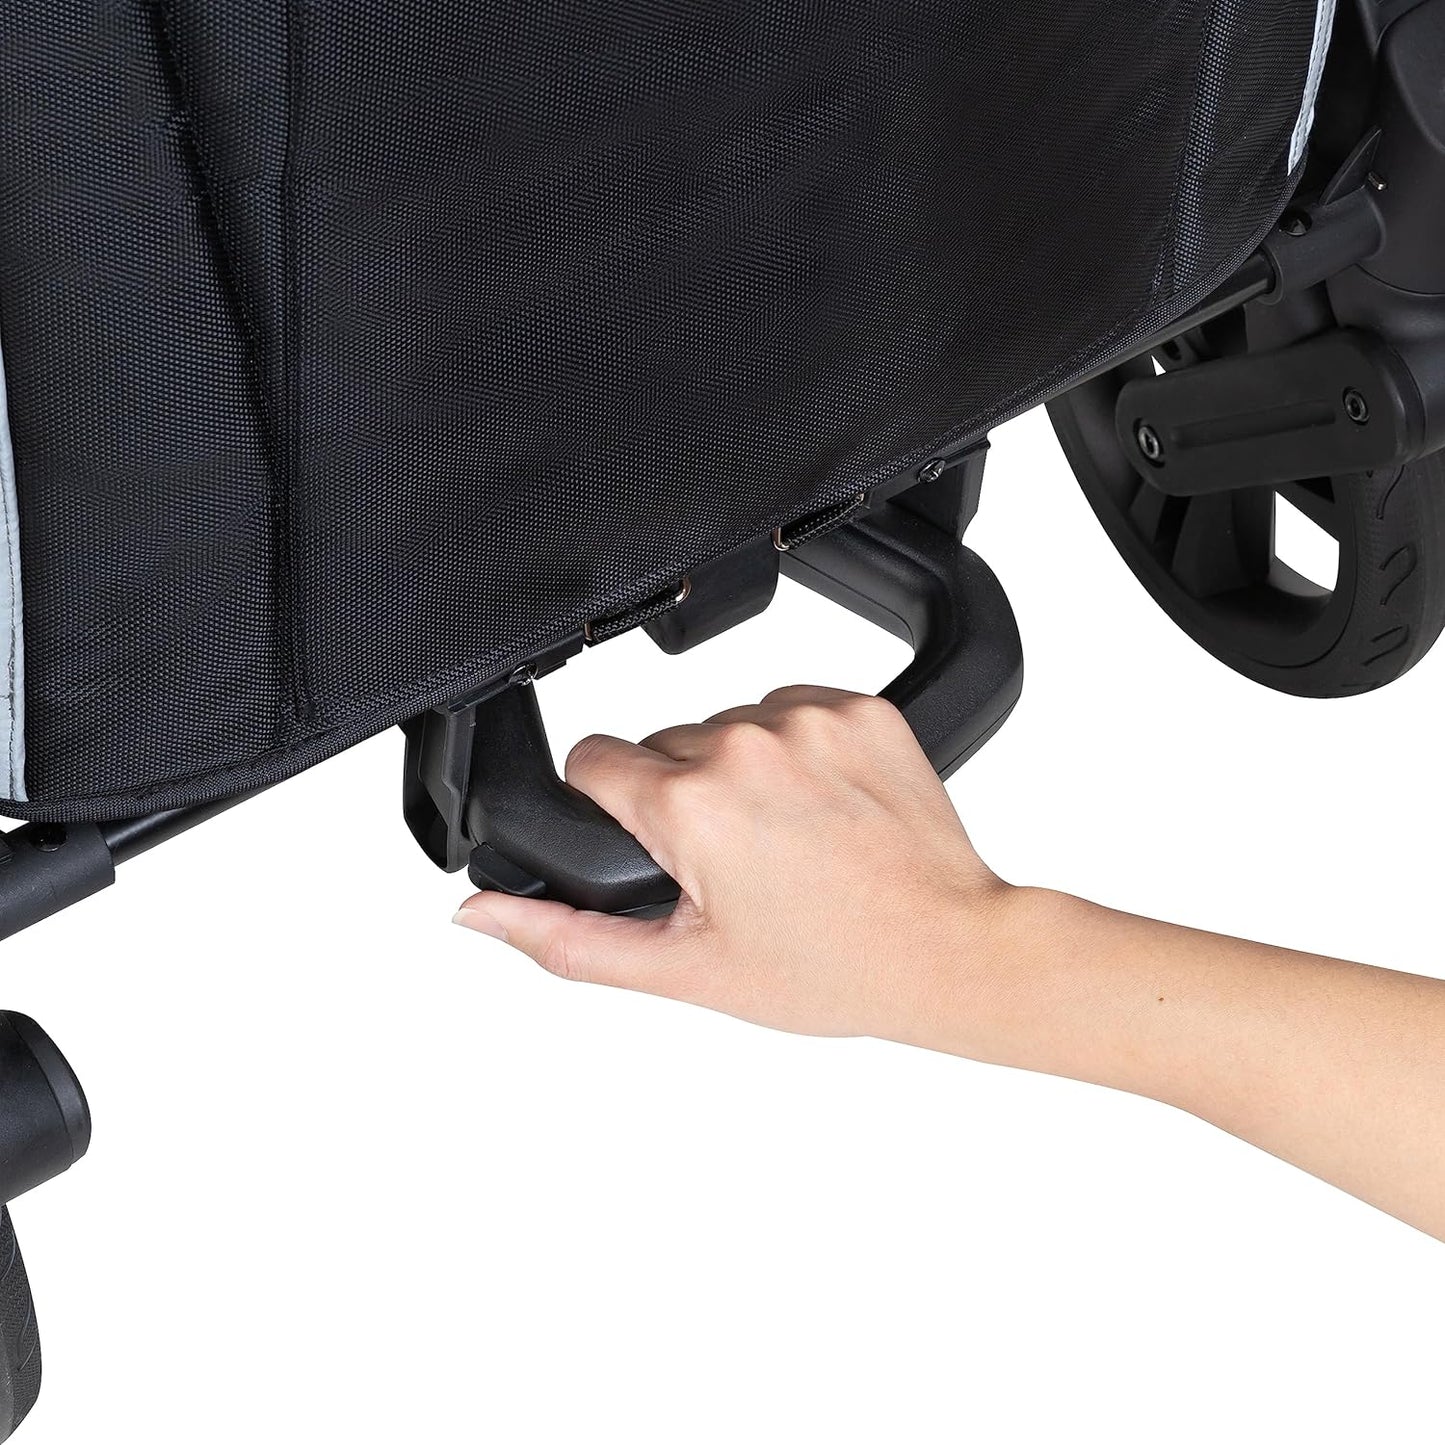 Baby Trend Expedition Stroller Wagon, Liberty Midnight